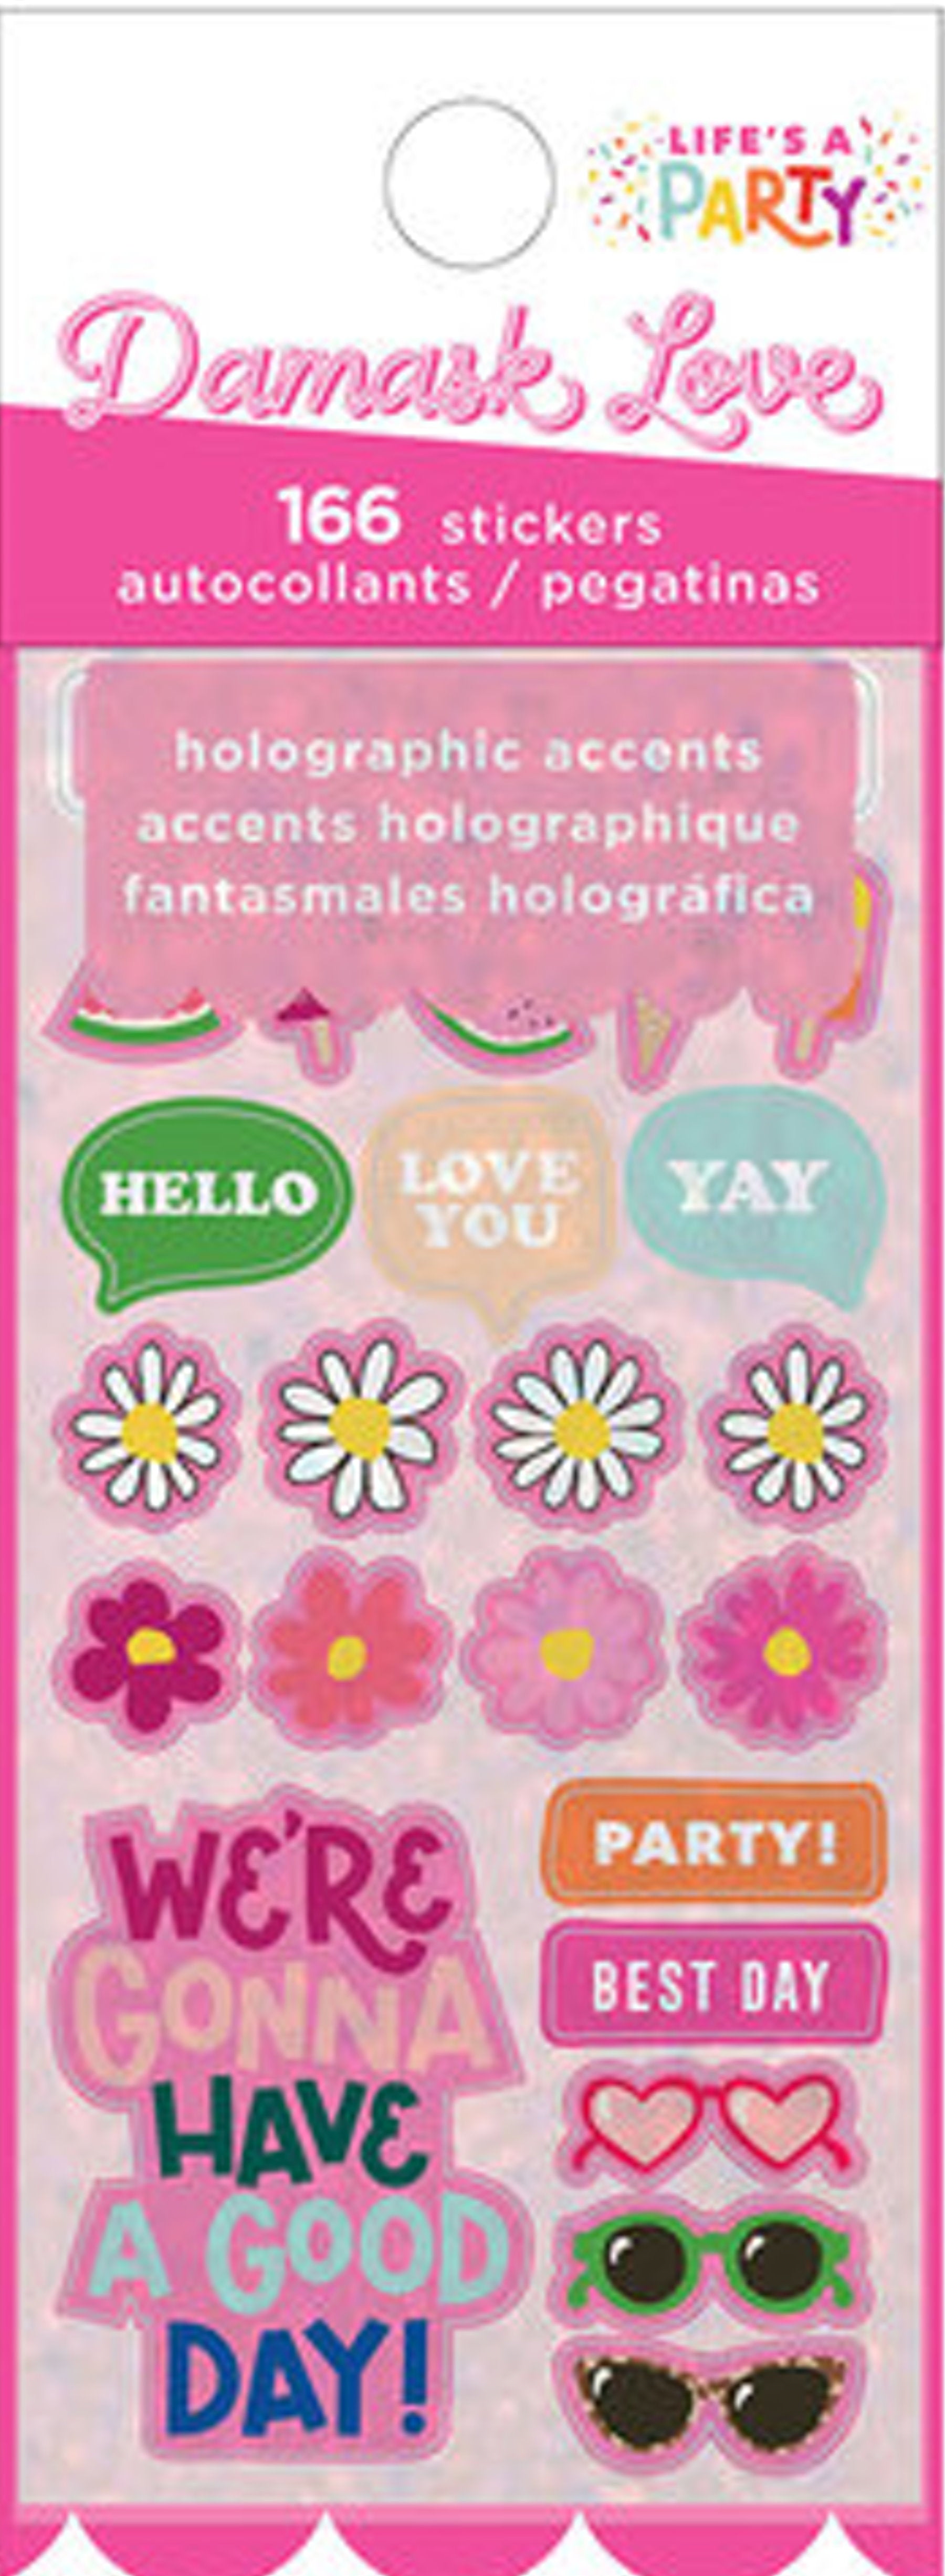 American Crafts Damask Love It's A Party Sticker Book-166